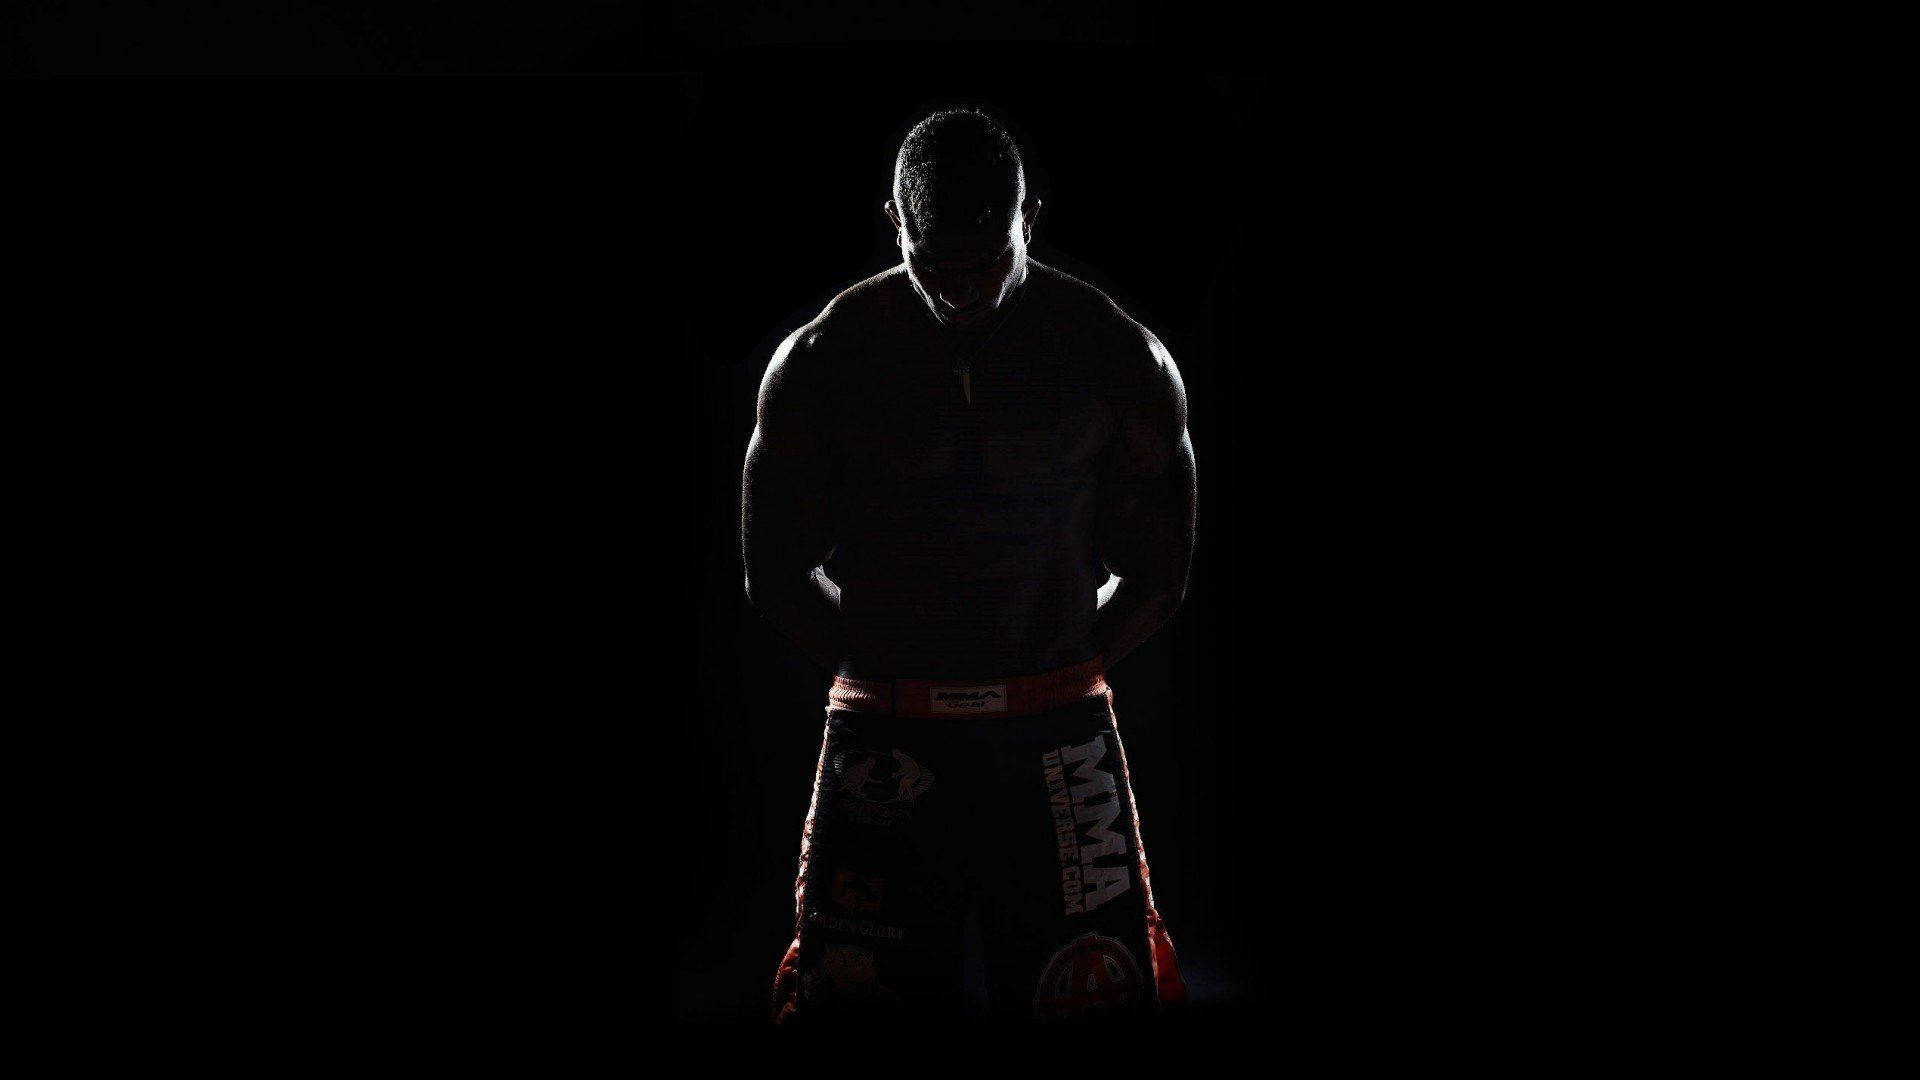 Mma Boxing Silhouette Background